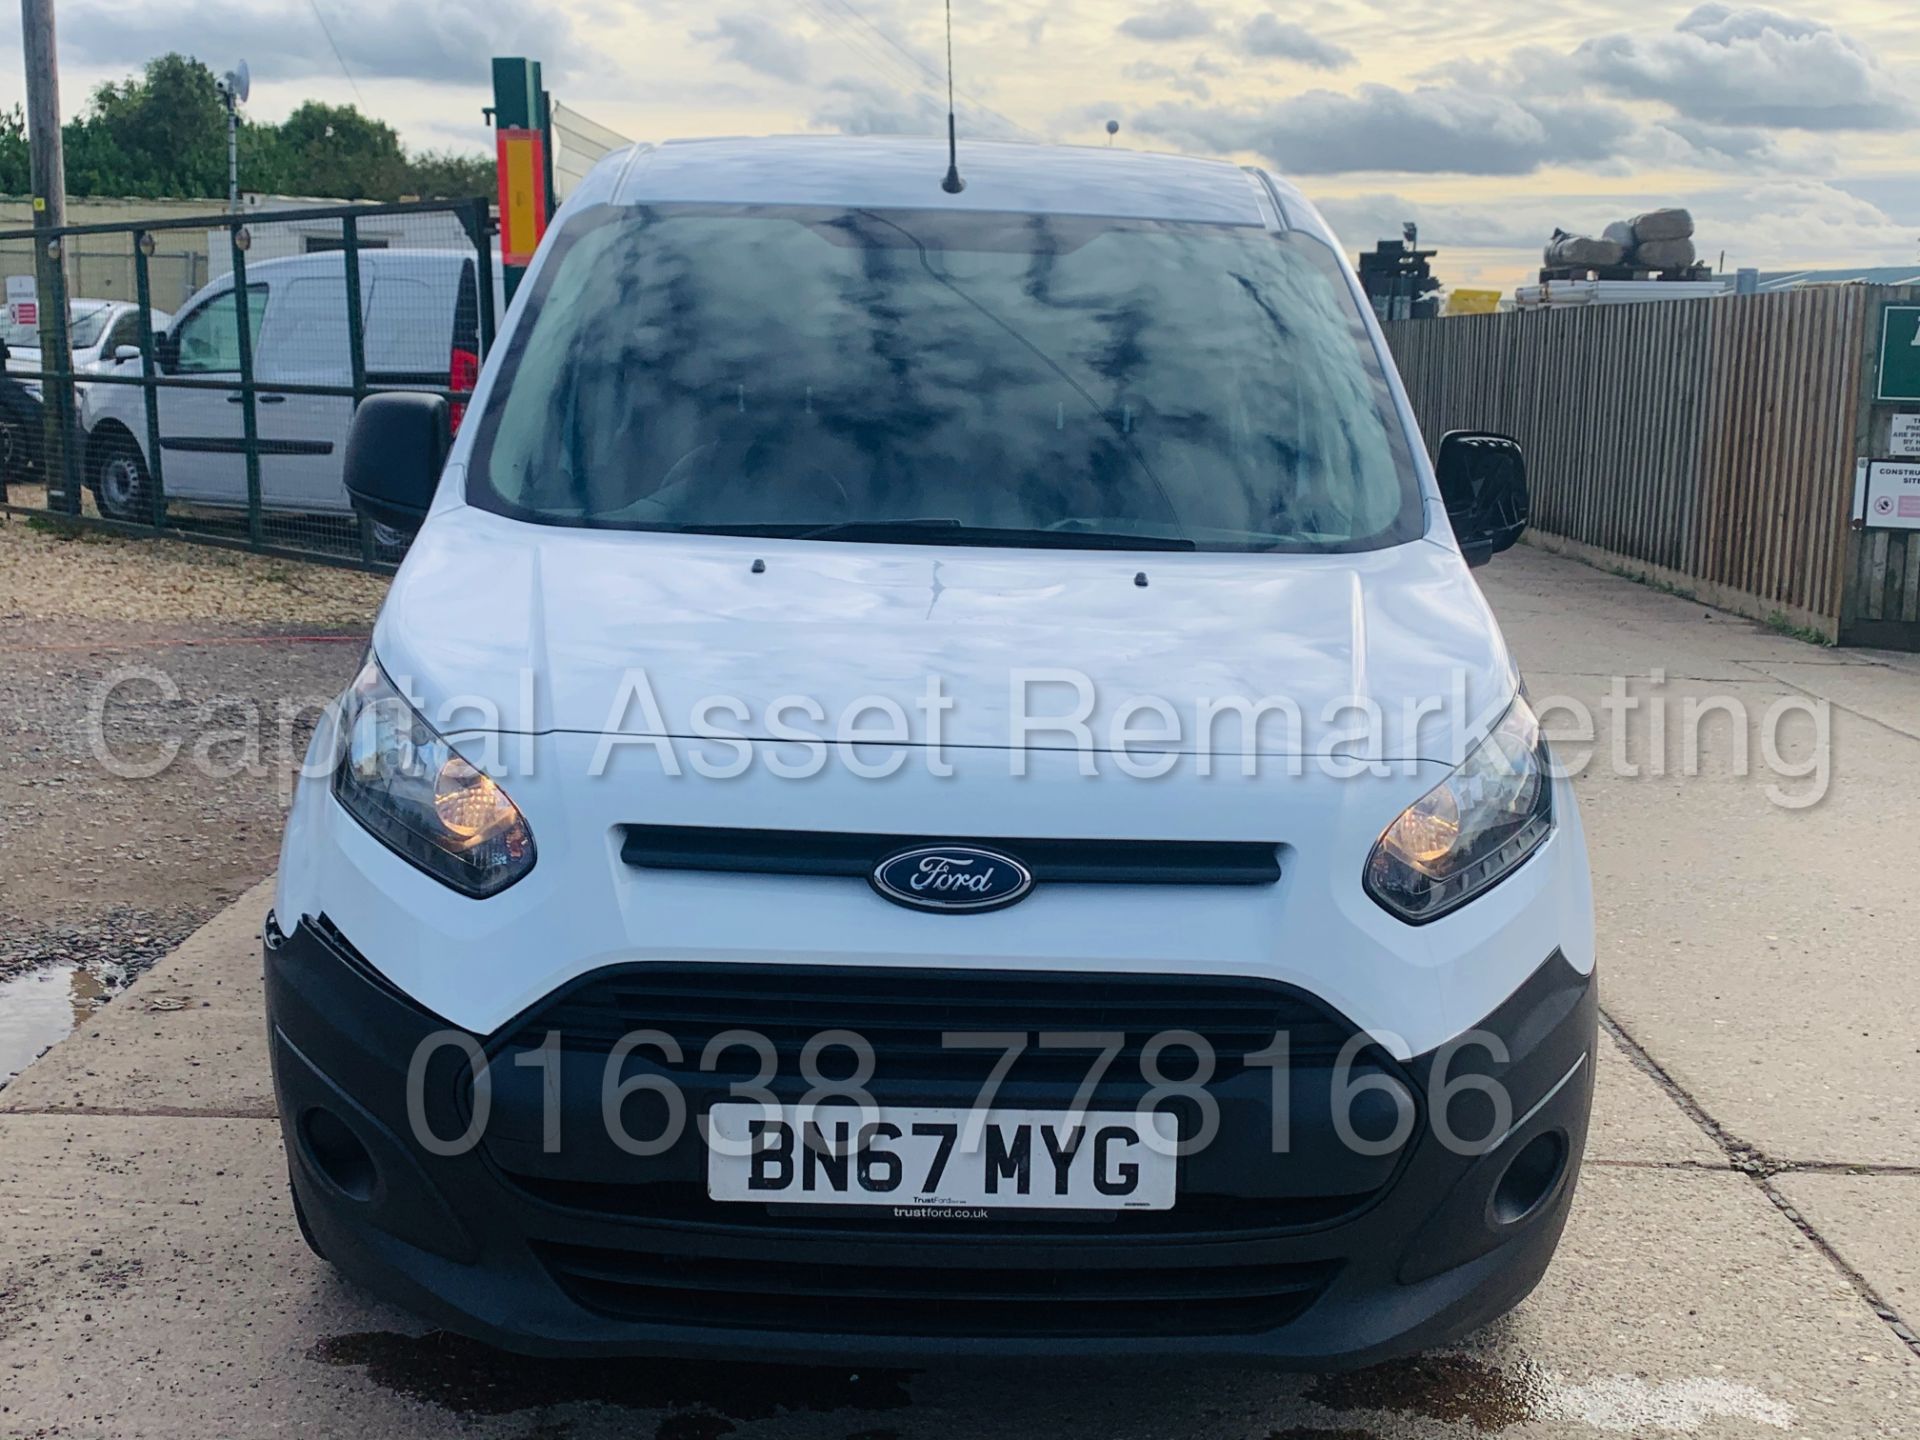 (On Sale) FORD TRANSIT CONNECT *LWB - 5 SEATER CREW VAN* (67 REG - EURO 6) 1.5 TDCI *A/C* (1 OWNER) - Image 4 of 40